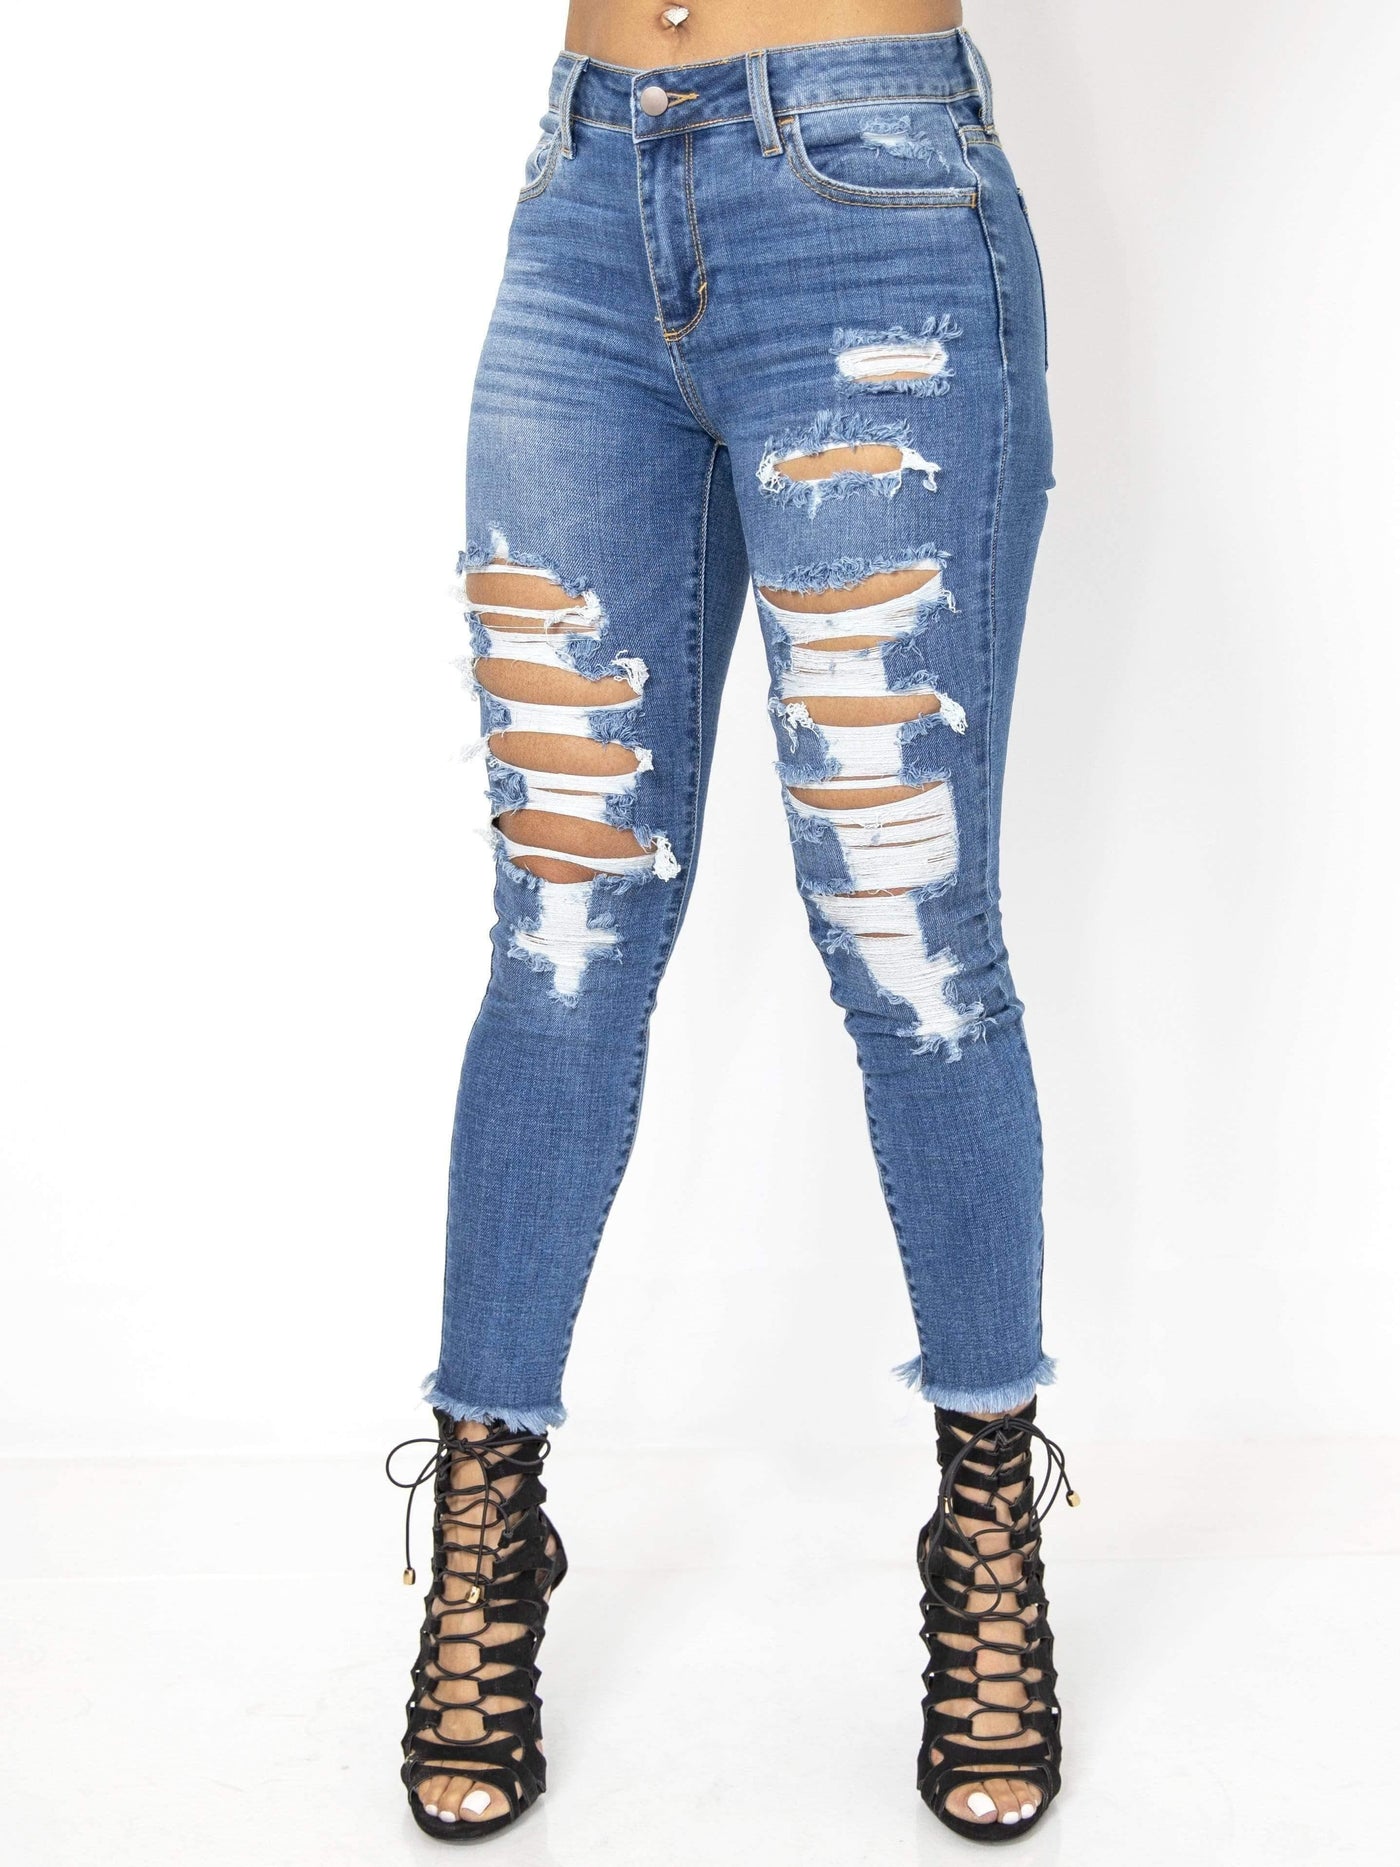 Don't Play Fair | Distressed Skinny Jeans - Statement Piece NY basic, Blue, Bottom, bottoms, Brooklyn Boutique, casual, chic, Denim, distressed, Fall, jeans, jeans for women, Long Pants, Medium wash denim, mid rise jeans, Misses, Skinny Fit, skinny fit jeans, skinny jeans, skinny pants, statement, Statement Clothing, statement piece, Statement Piece Boutique, statement piece ny, Statement Pieces, Statement Pieces Boutique, unique ripped jeans, unique women's jeans, Women's Boutique Statement Bottoms